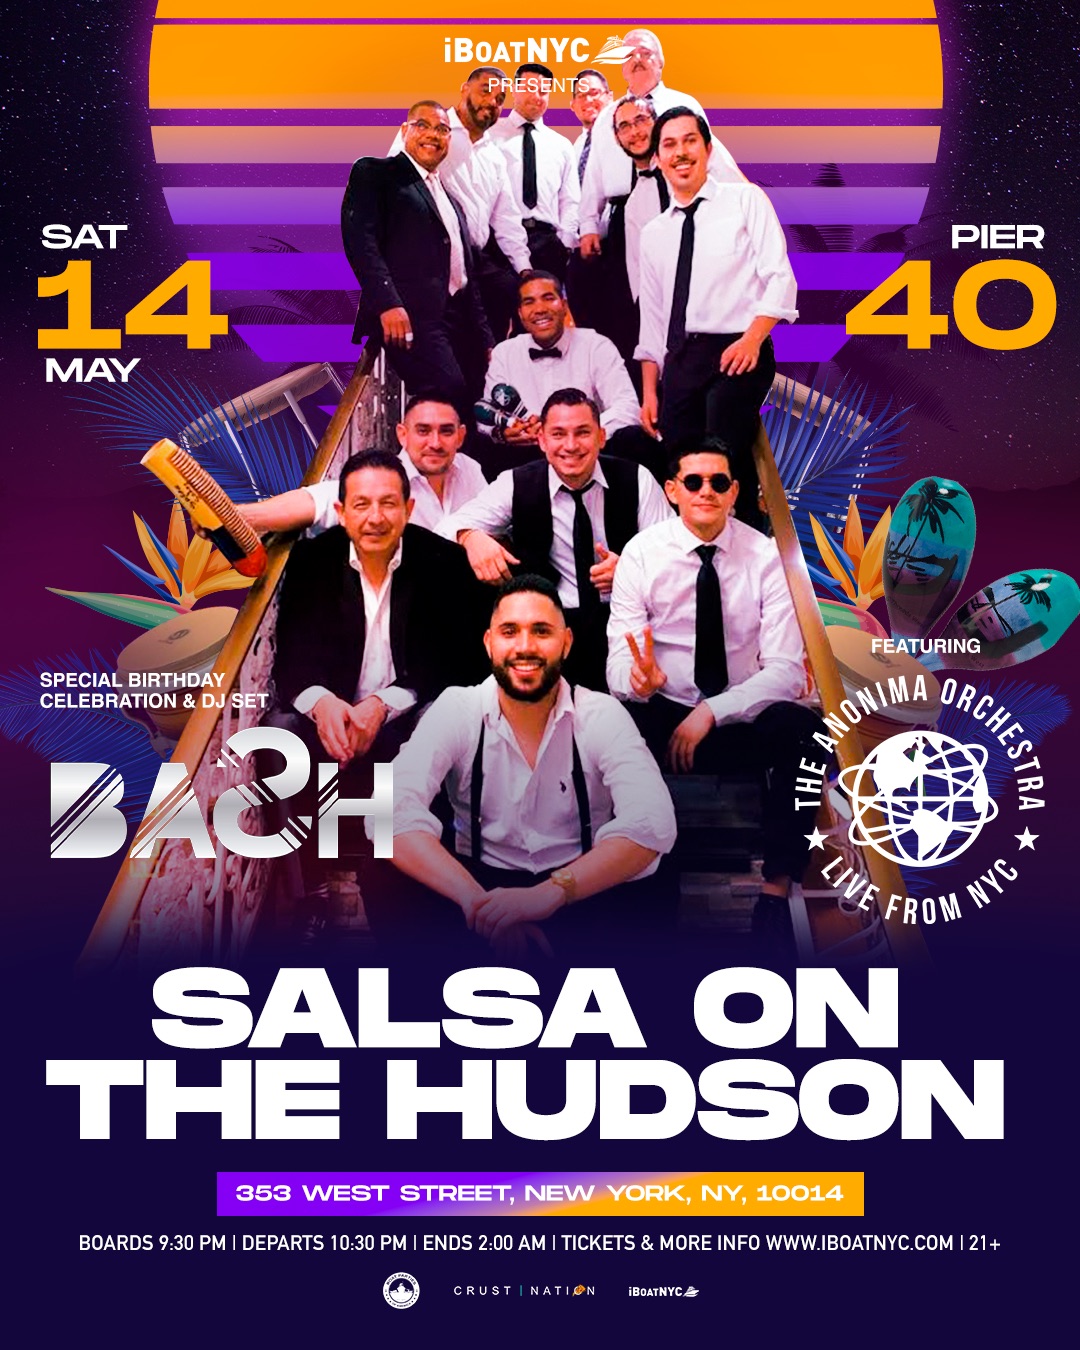 SALSA ON THE HUDSON | MEGA YACHT INFINITY Boat Party Yacht Cruise NYC